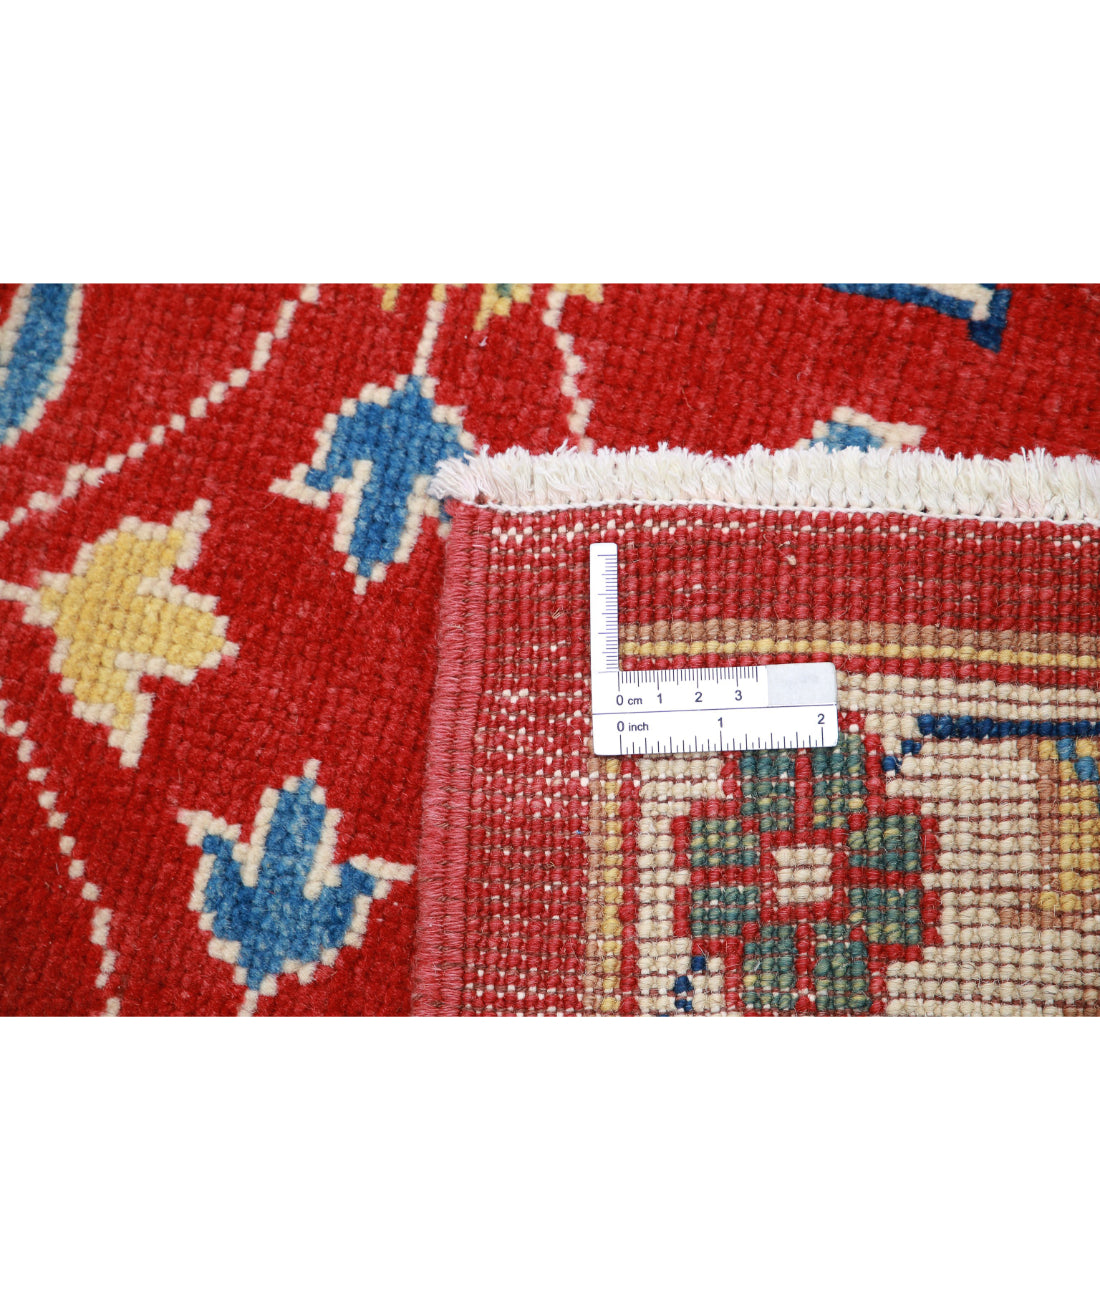 Ziegler 2'7'' X 3'7'' Hand-Knotted Wool Rug 2'7'' x 3'7'' (78 X 108) / Red / N/A